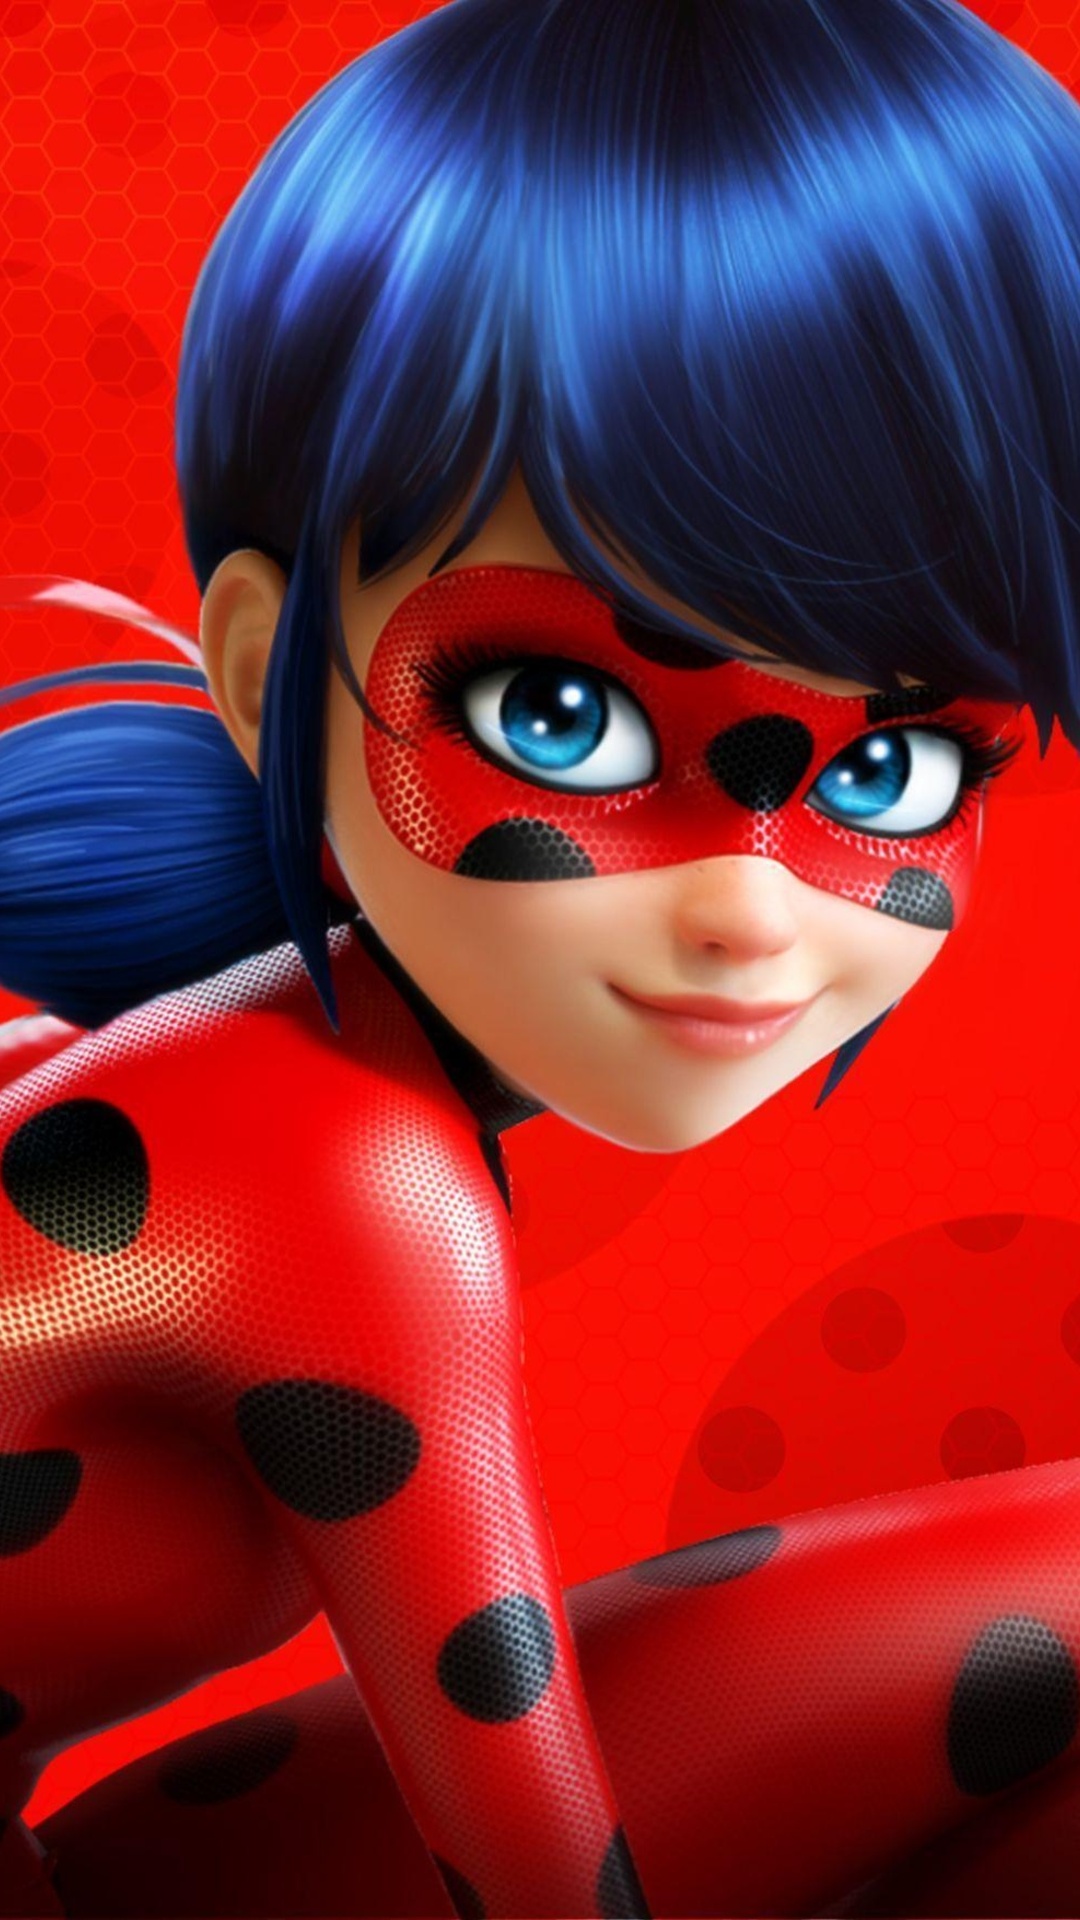 1080x1920 Miraculous Tales Of Ladybug And Cat Noir Iphone 7 6s 6 Plus Pixel Xl One Plus 3 3t 5 Hd 4k Wallpapers Images Backgrounds Photos And Pictures We got tons of ladybug & cat noir hd wallpaper here, also complete heroes from animated movies miraculous ladybug & cat noir. 1080x1920 miraculous tales of ladybug